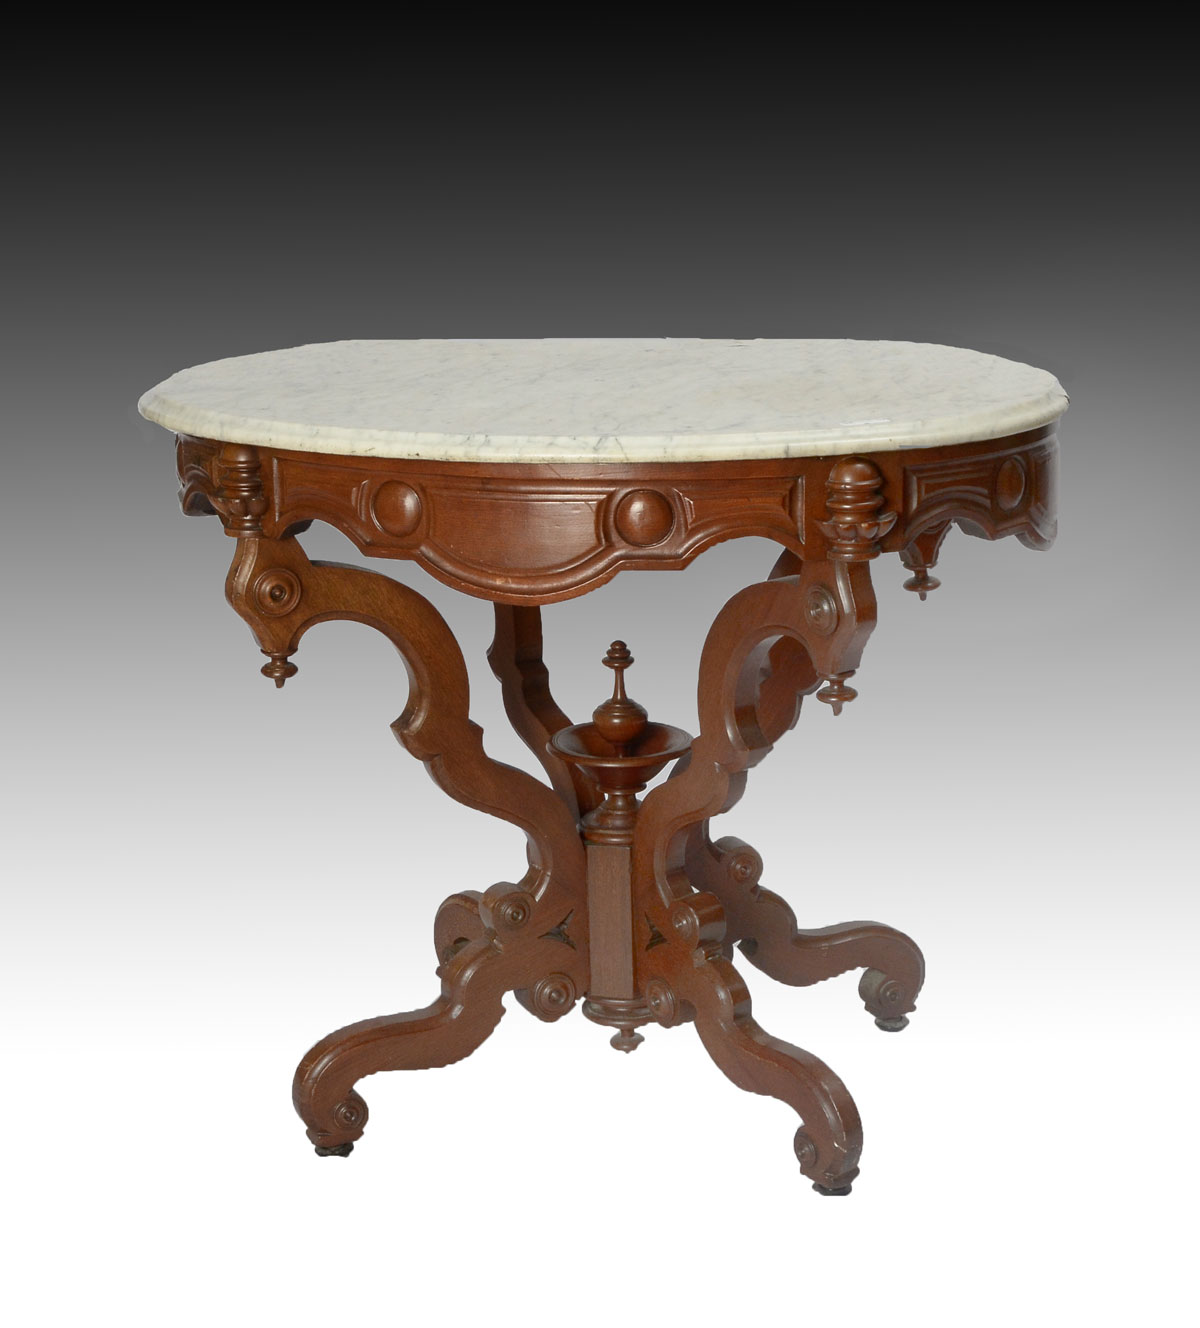 OVAL MARBLE TOP MID-VICTORIAN PARLOR